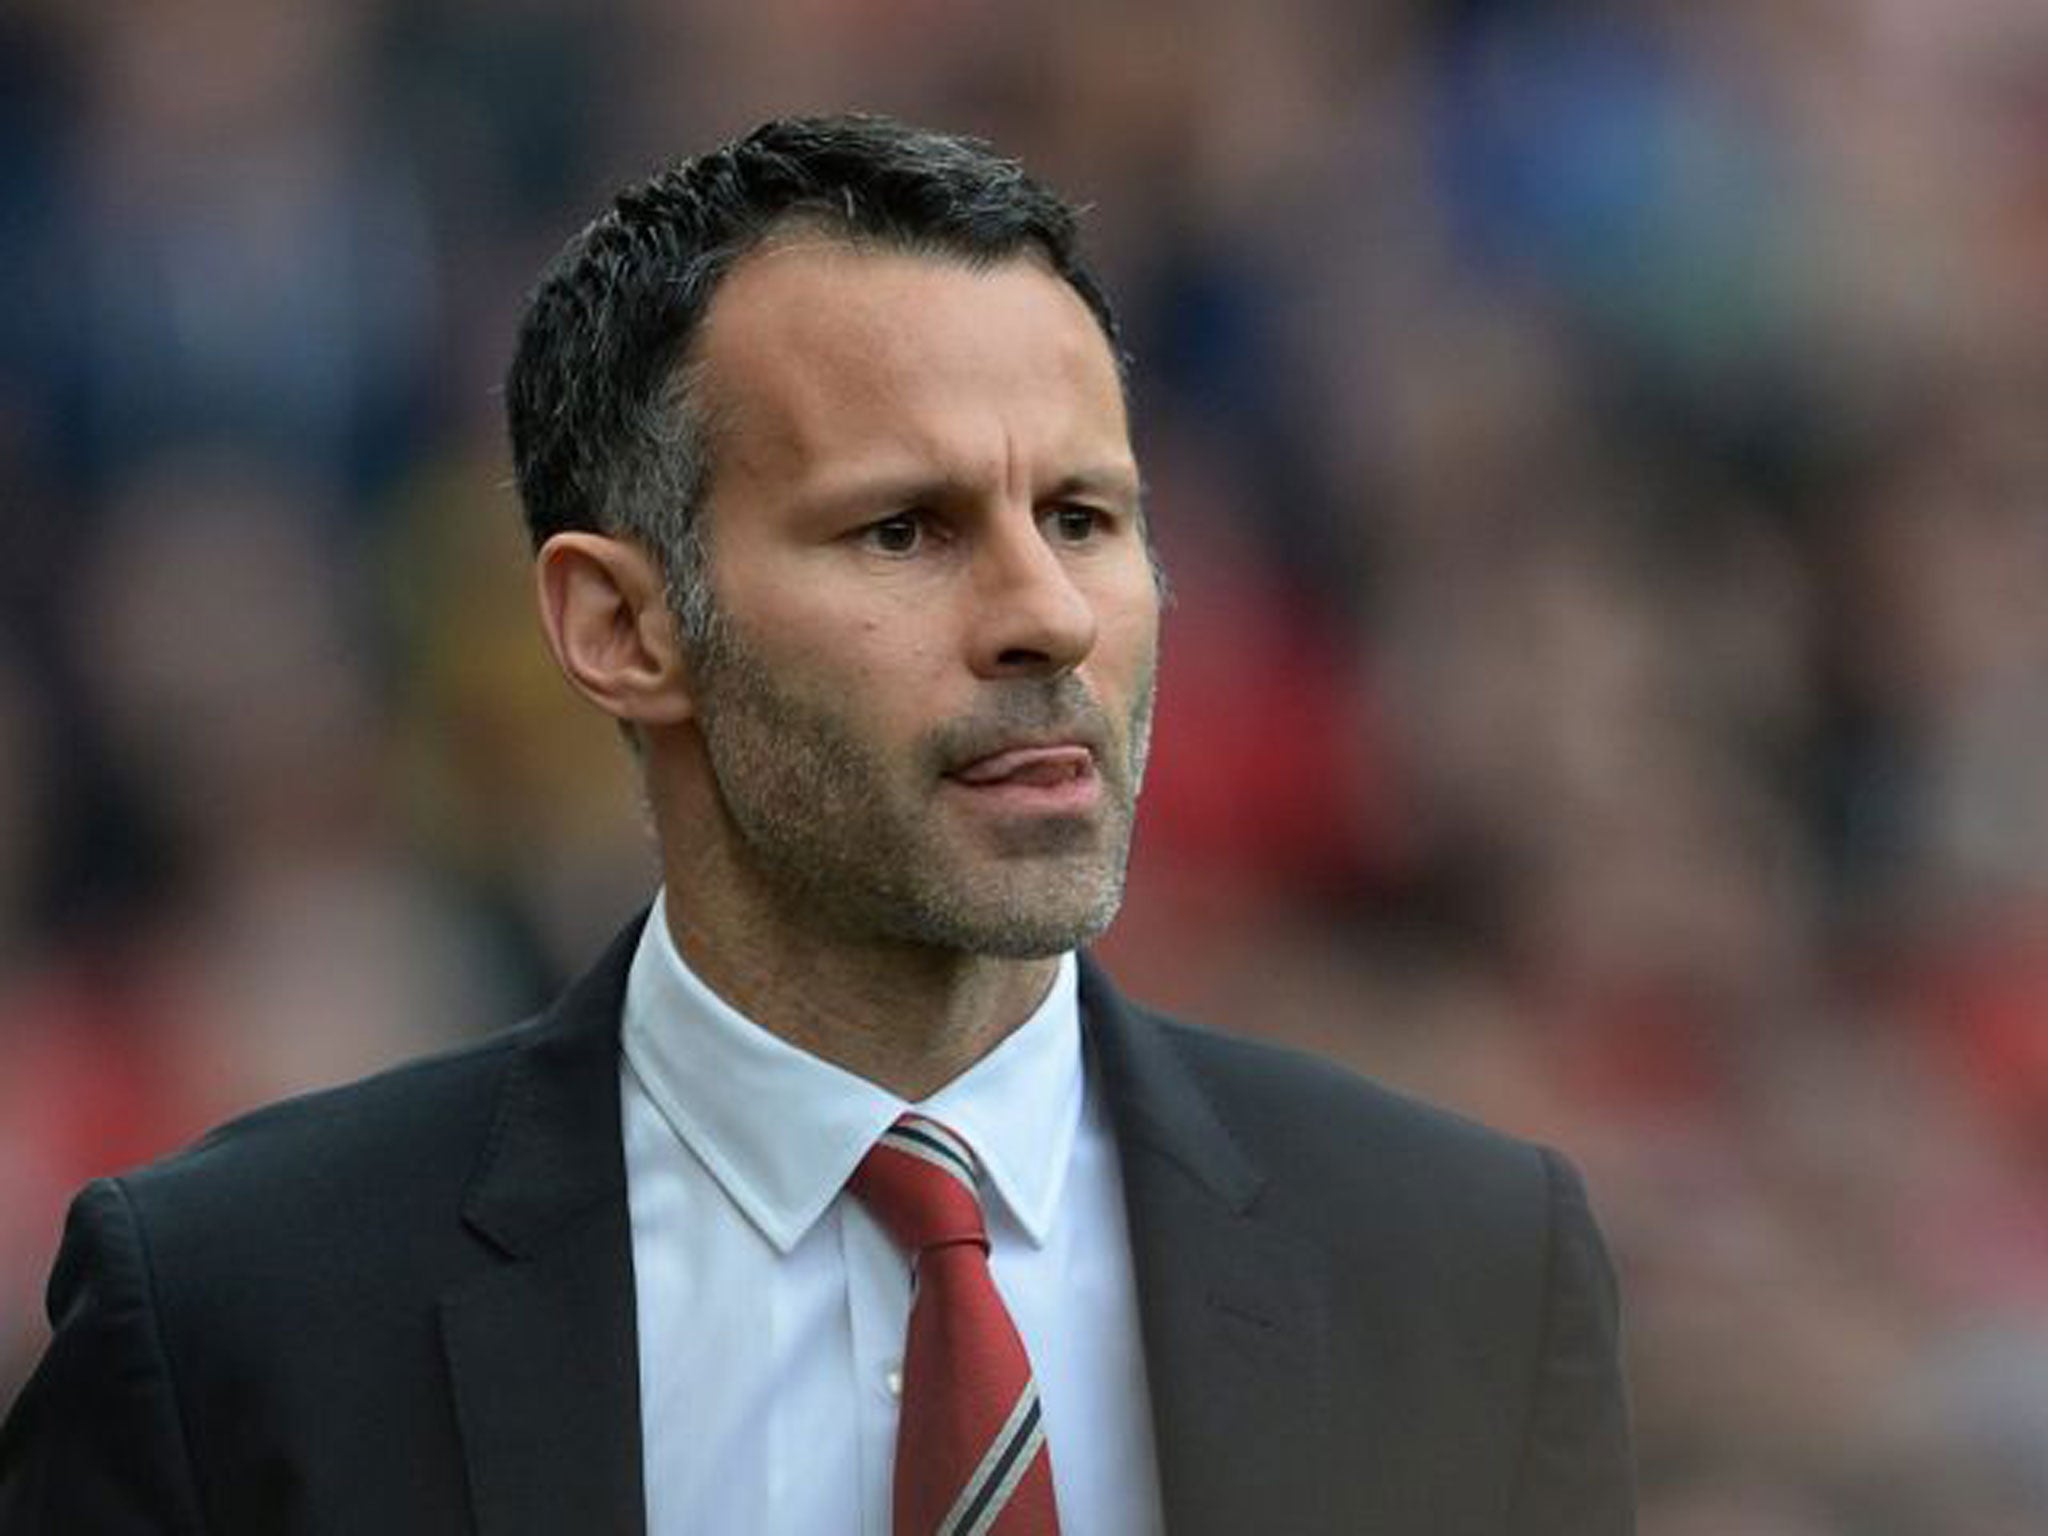 The support for Ryan Giggs to lead Manchester United full time is growing